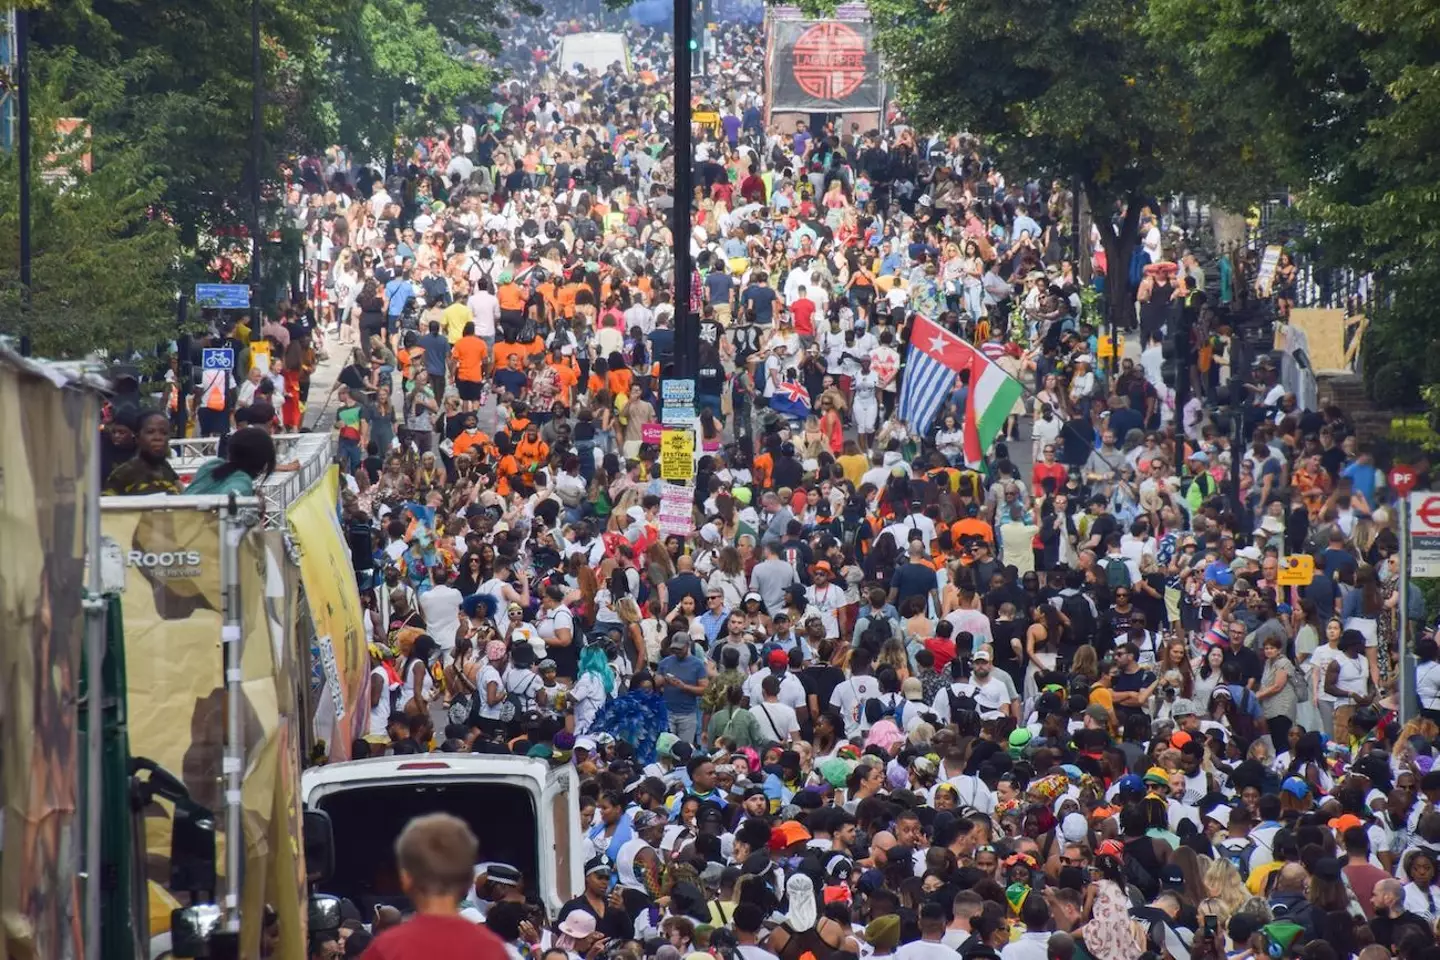 Crowds of people took over the streets of west London on bank holiday Monday as Notting Hill Carnival transformed the area into a party.